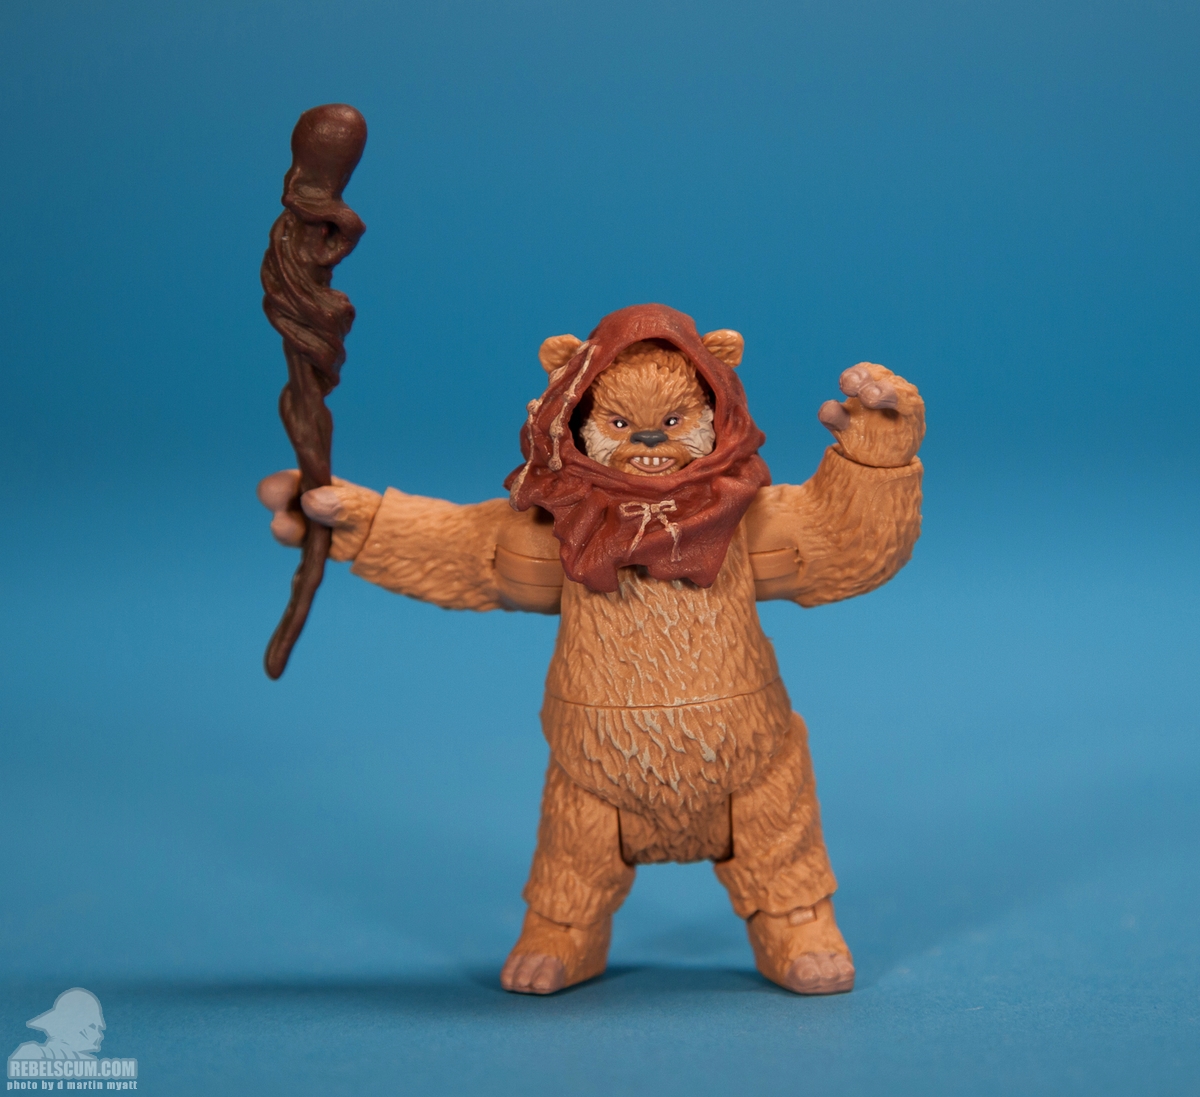 Ewok_Scouts_The_Vintage_Collection_TVC_Kmart-27.jpg